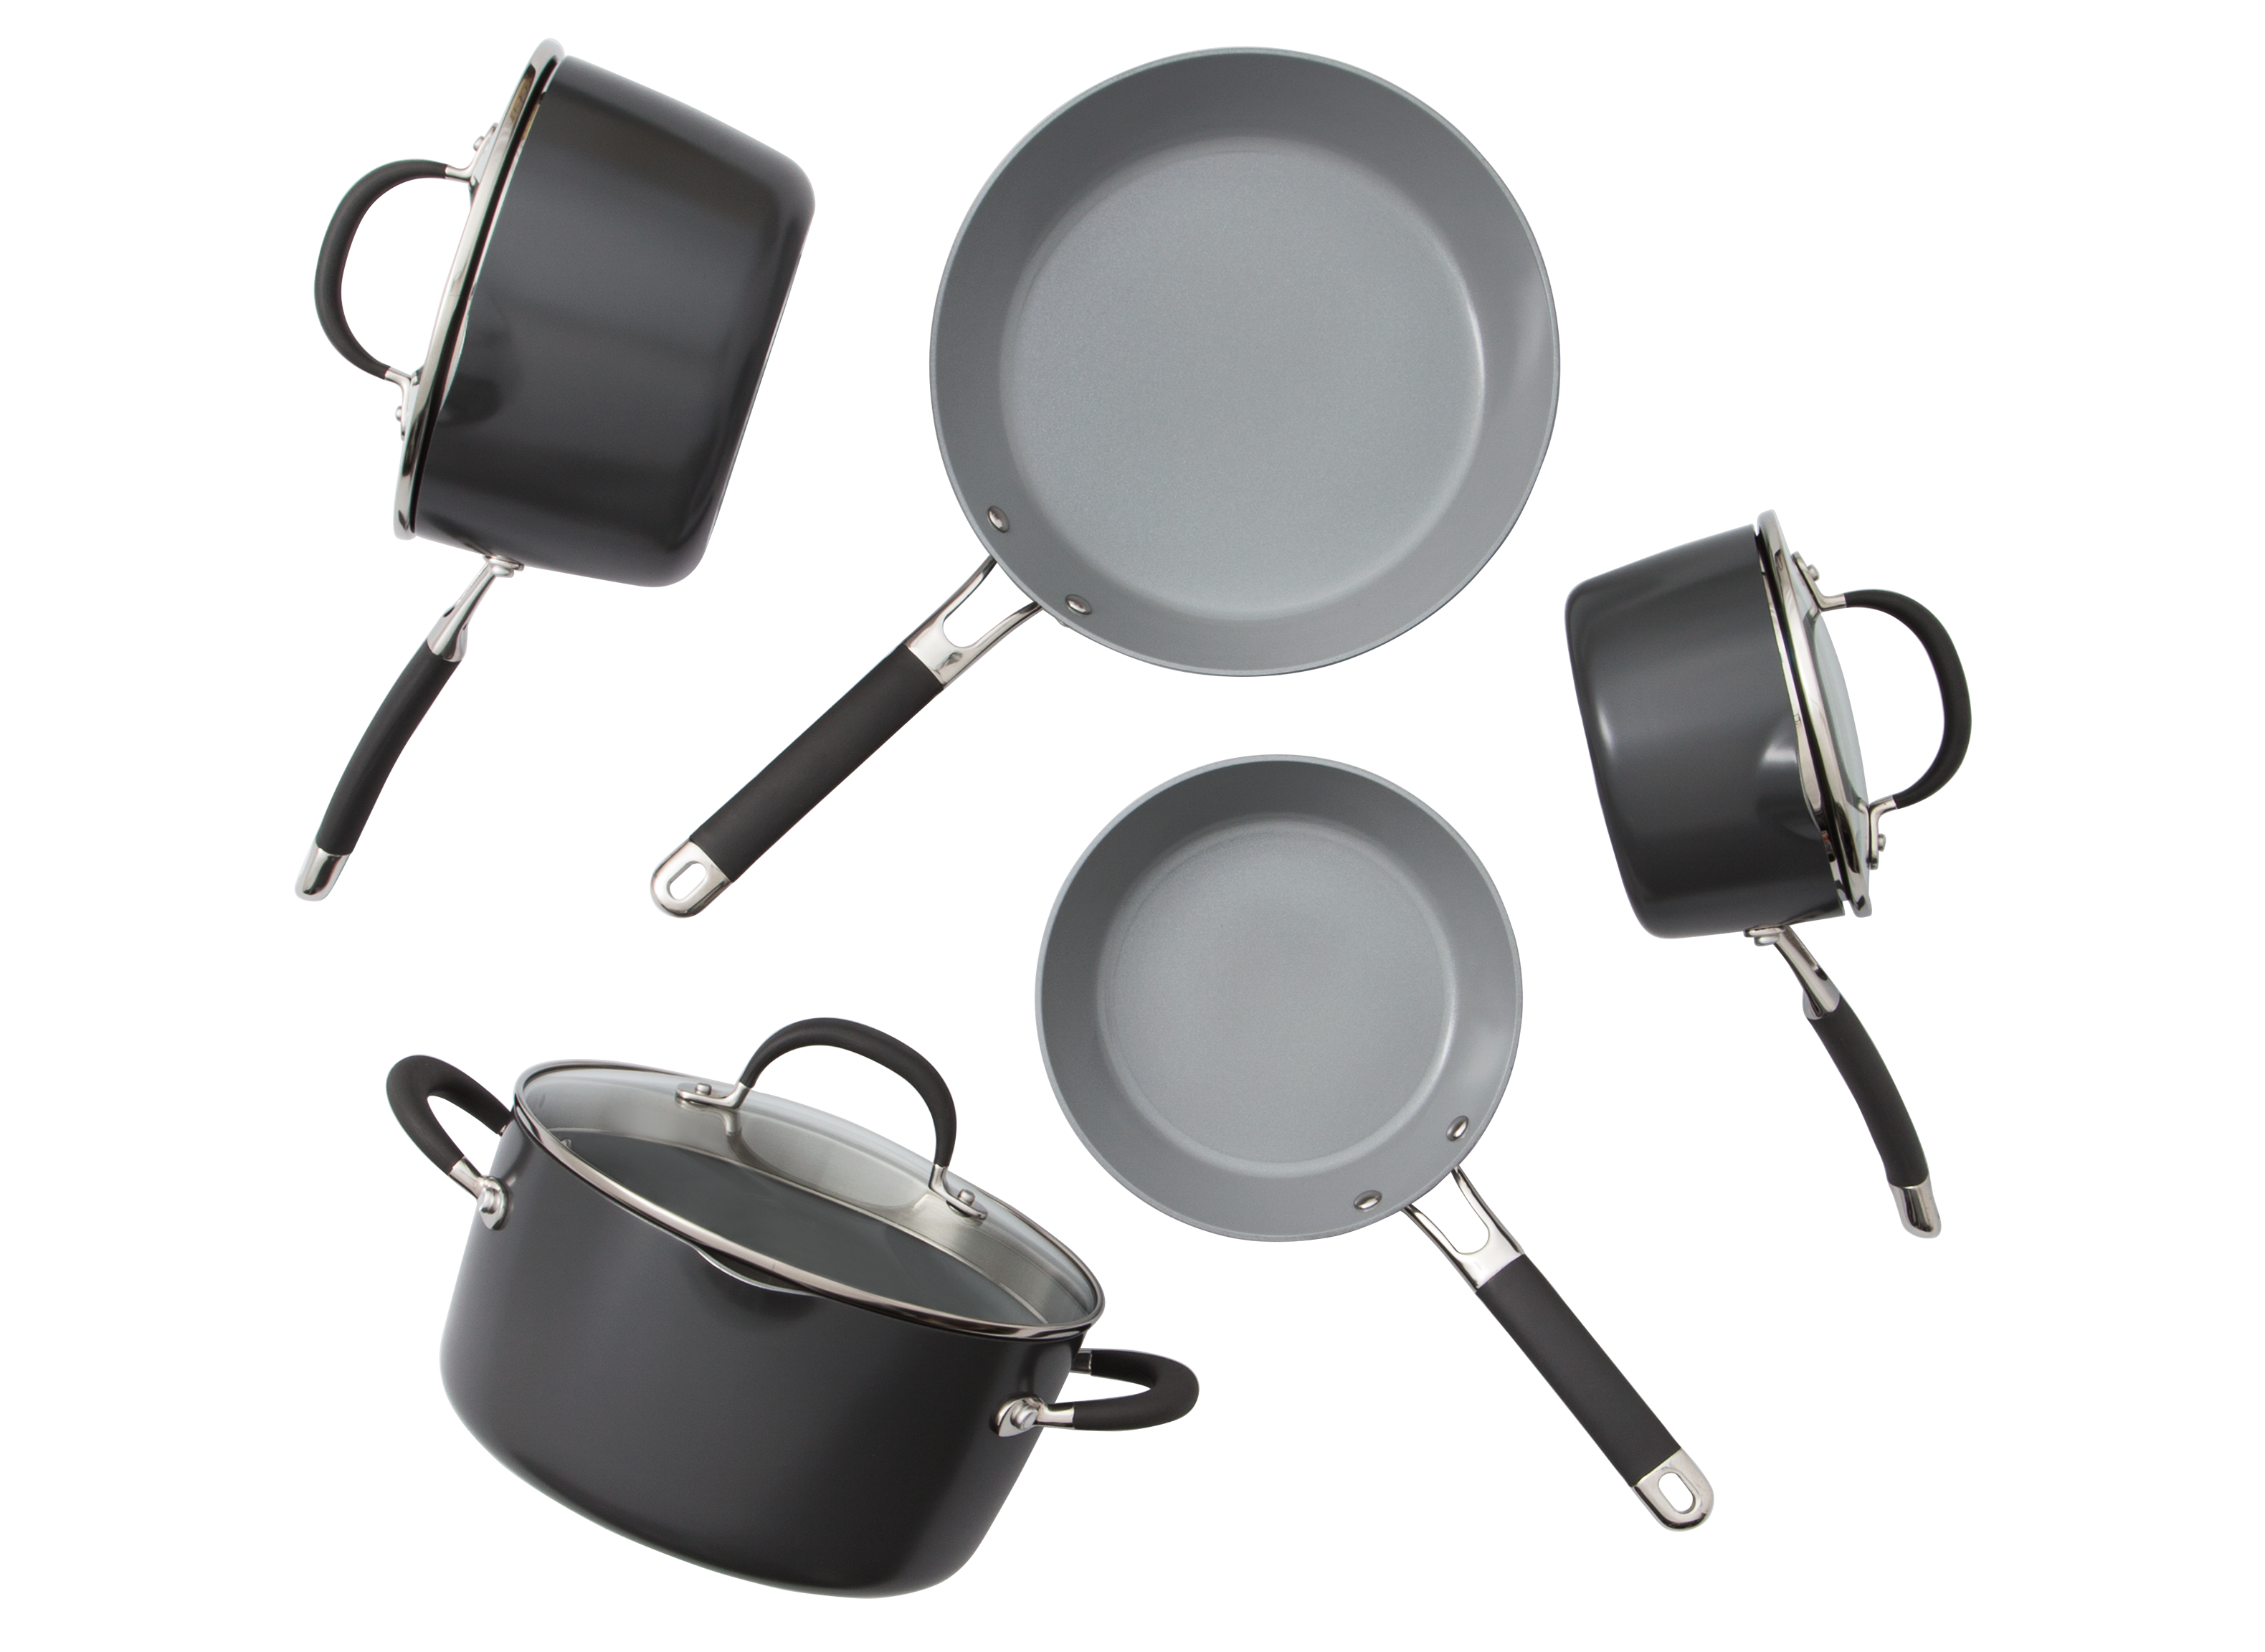 Made By Design (Target) Ceramic Coated Aluminum Cookware Review